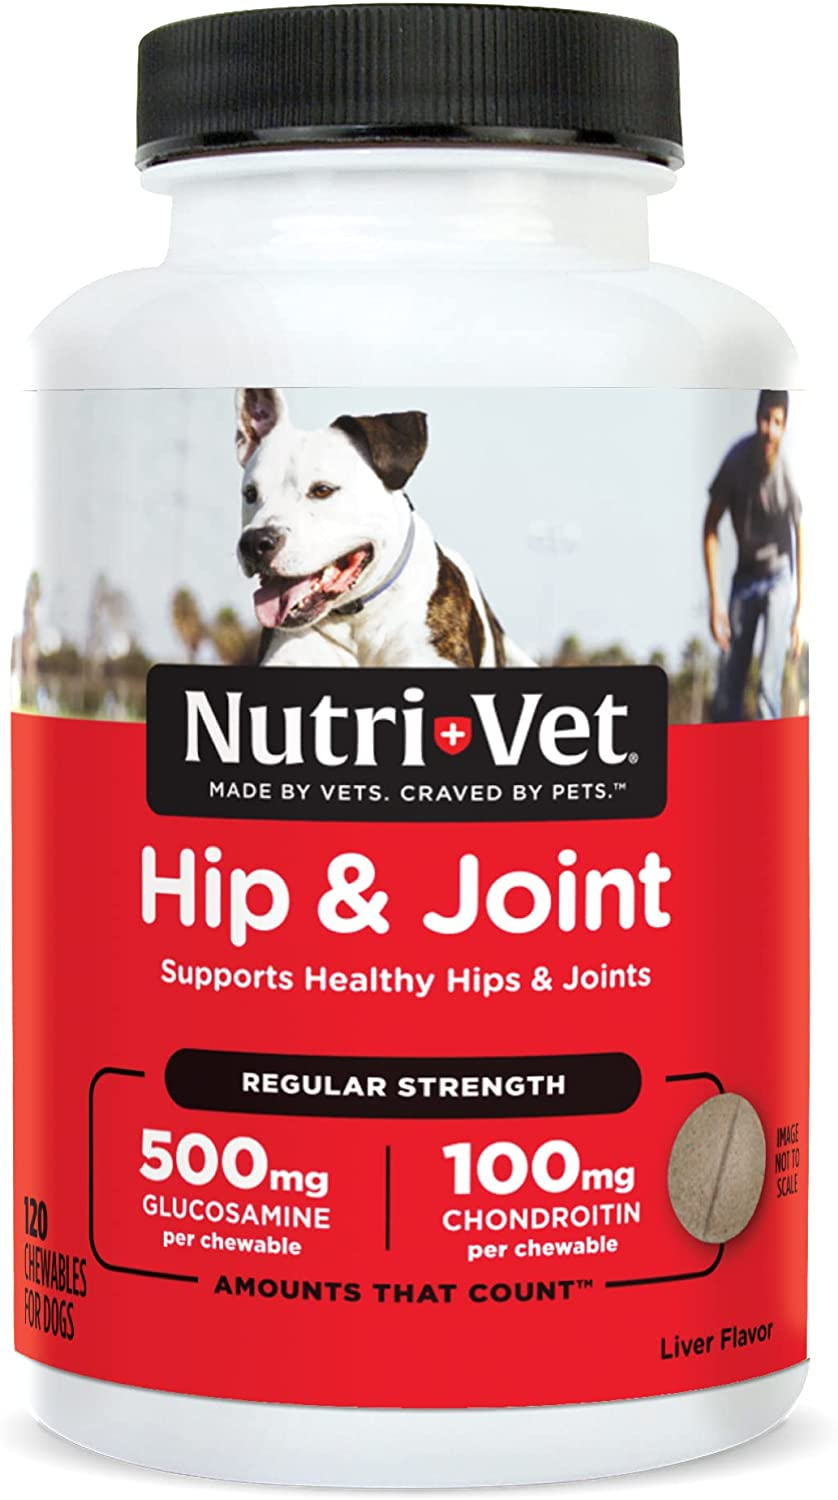 Hip & Joint Chewable Dog Supplements | Formulated with Glucosamine & Chondroitin for Dogs | 120 Count